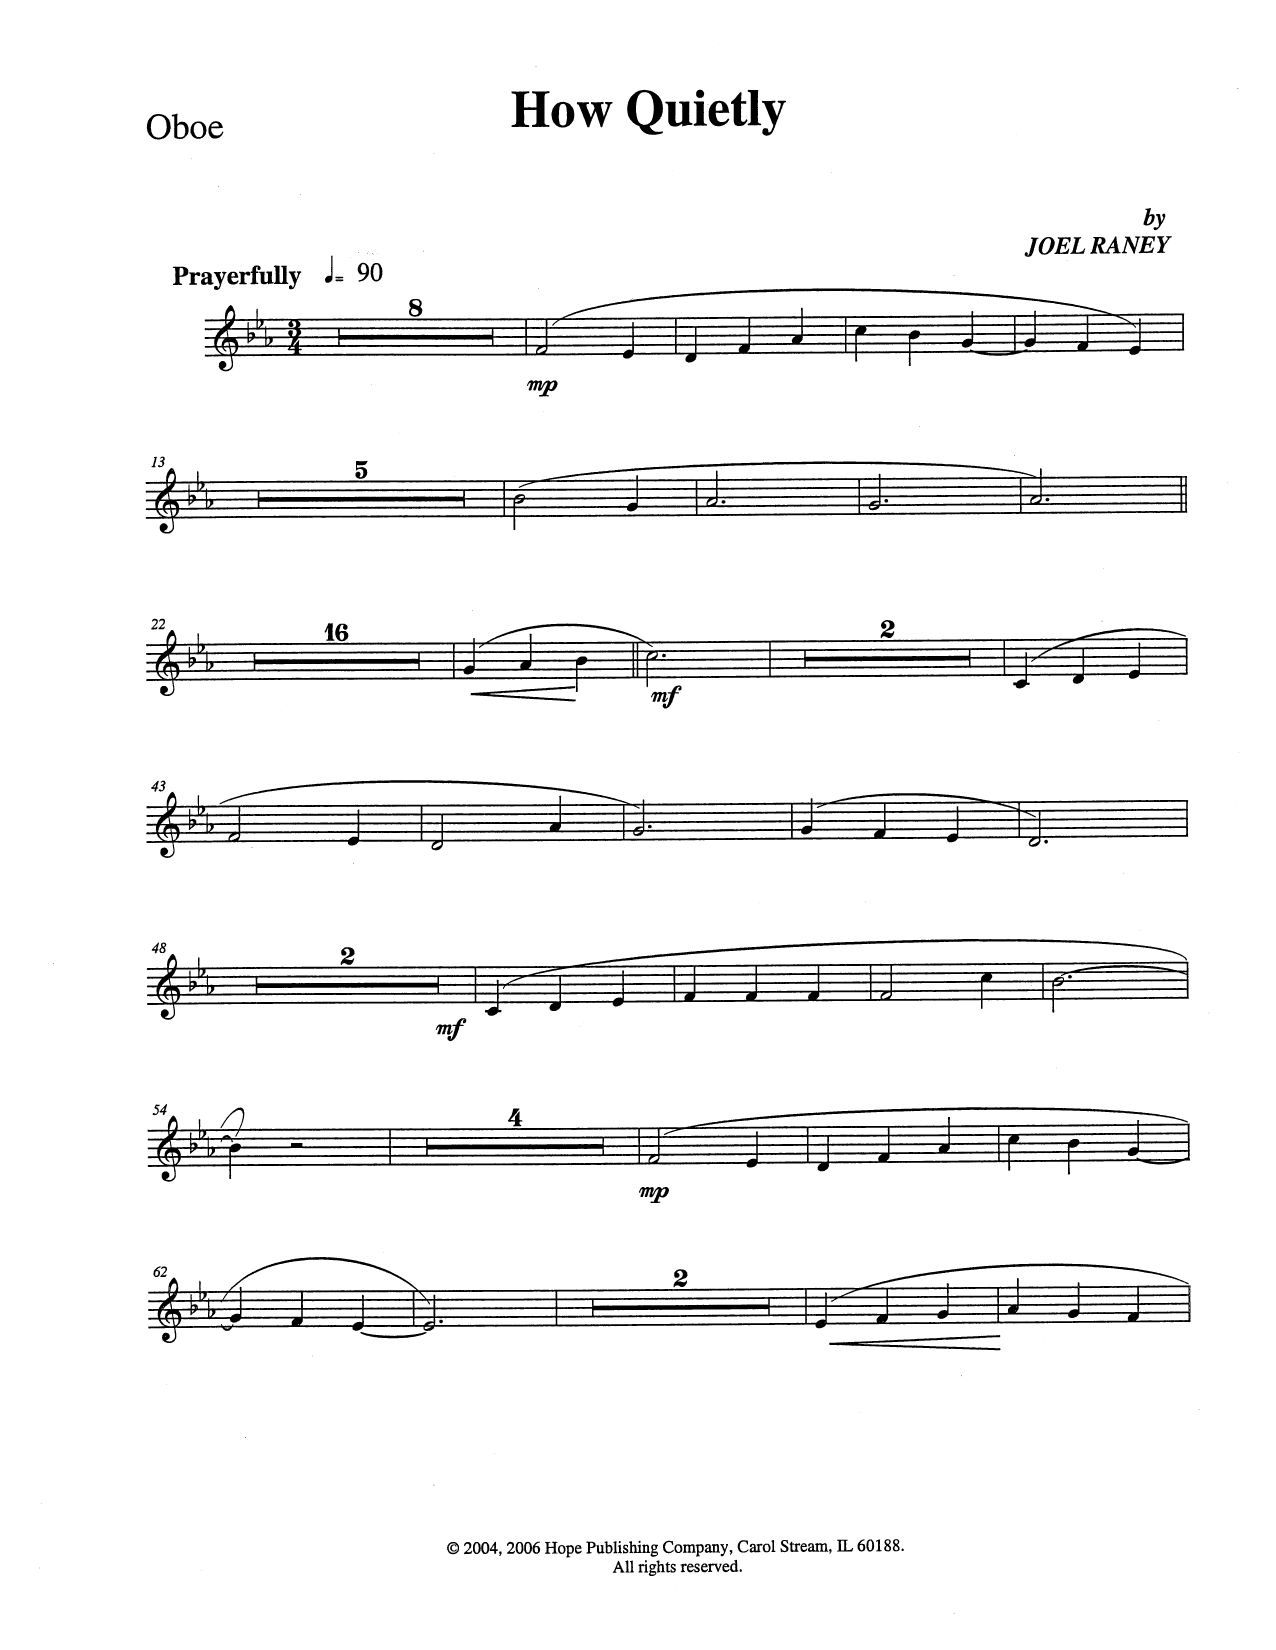 Download Joel Raney How Quietly - Oboe Sheet Music